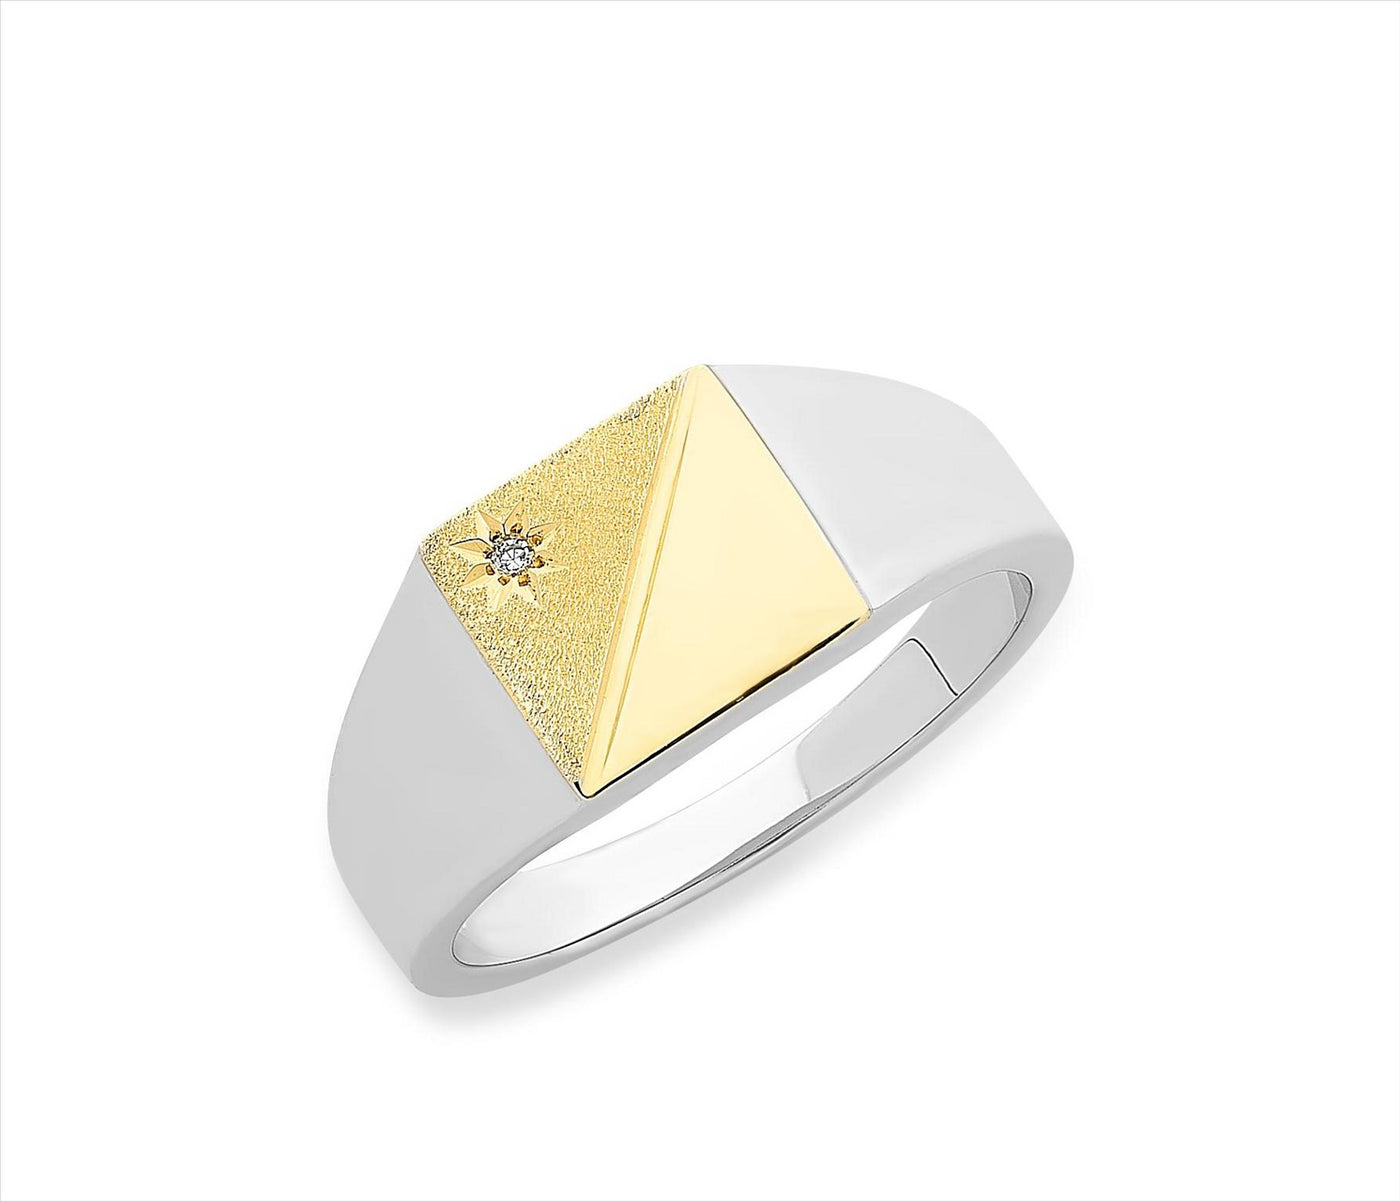 9ct Yellow Gold & Sterling Silver Diamond Signet Ring